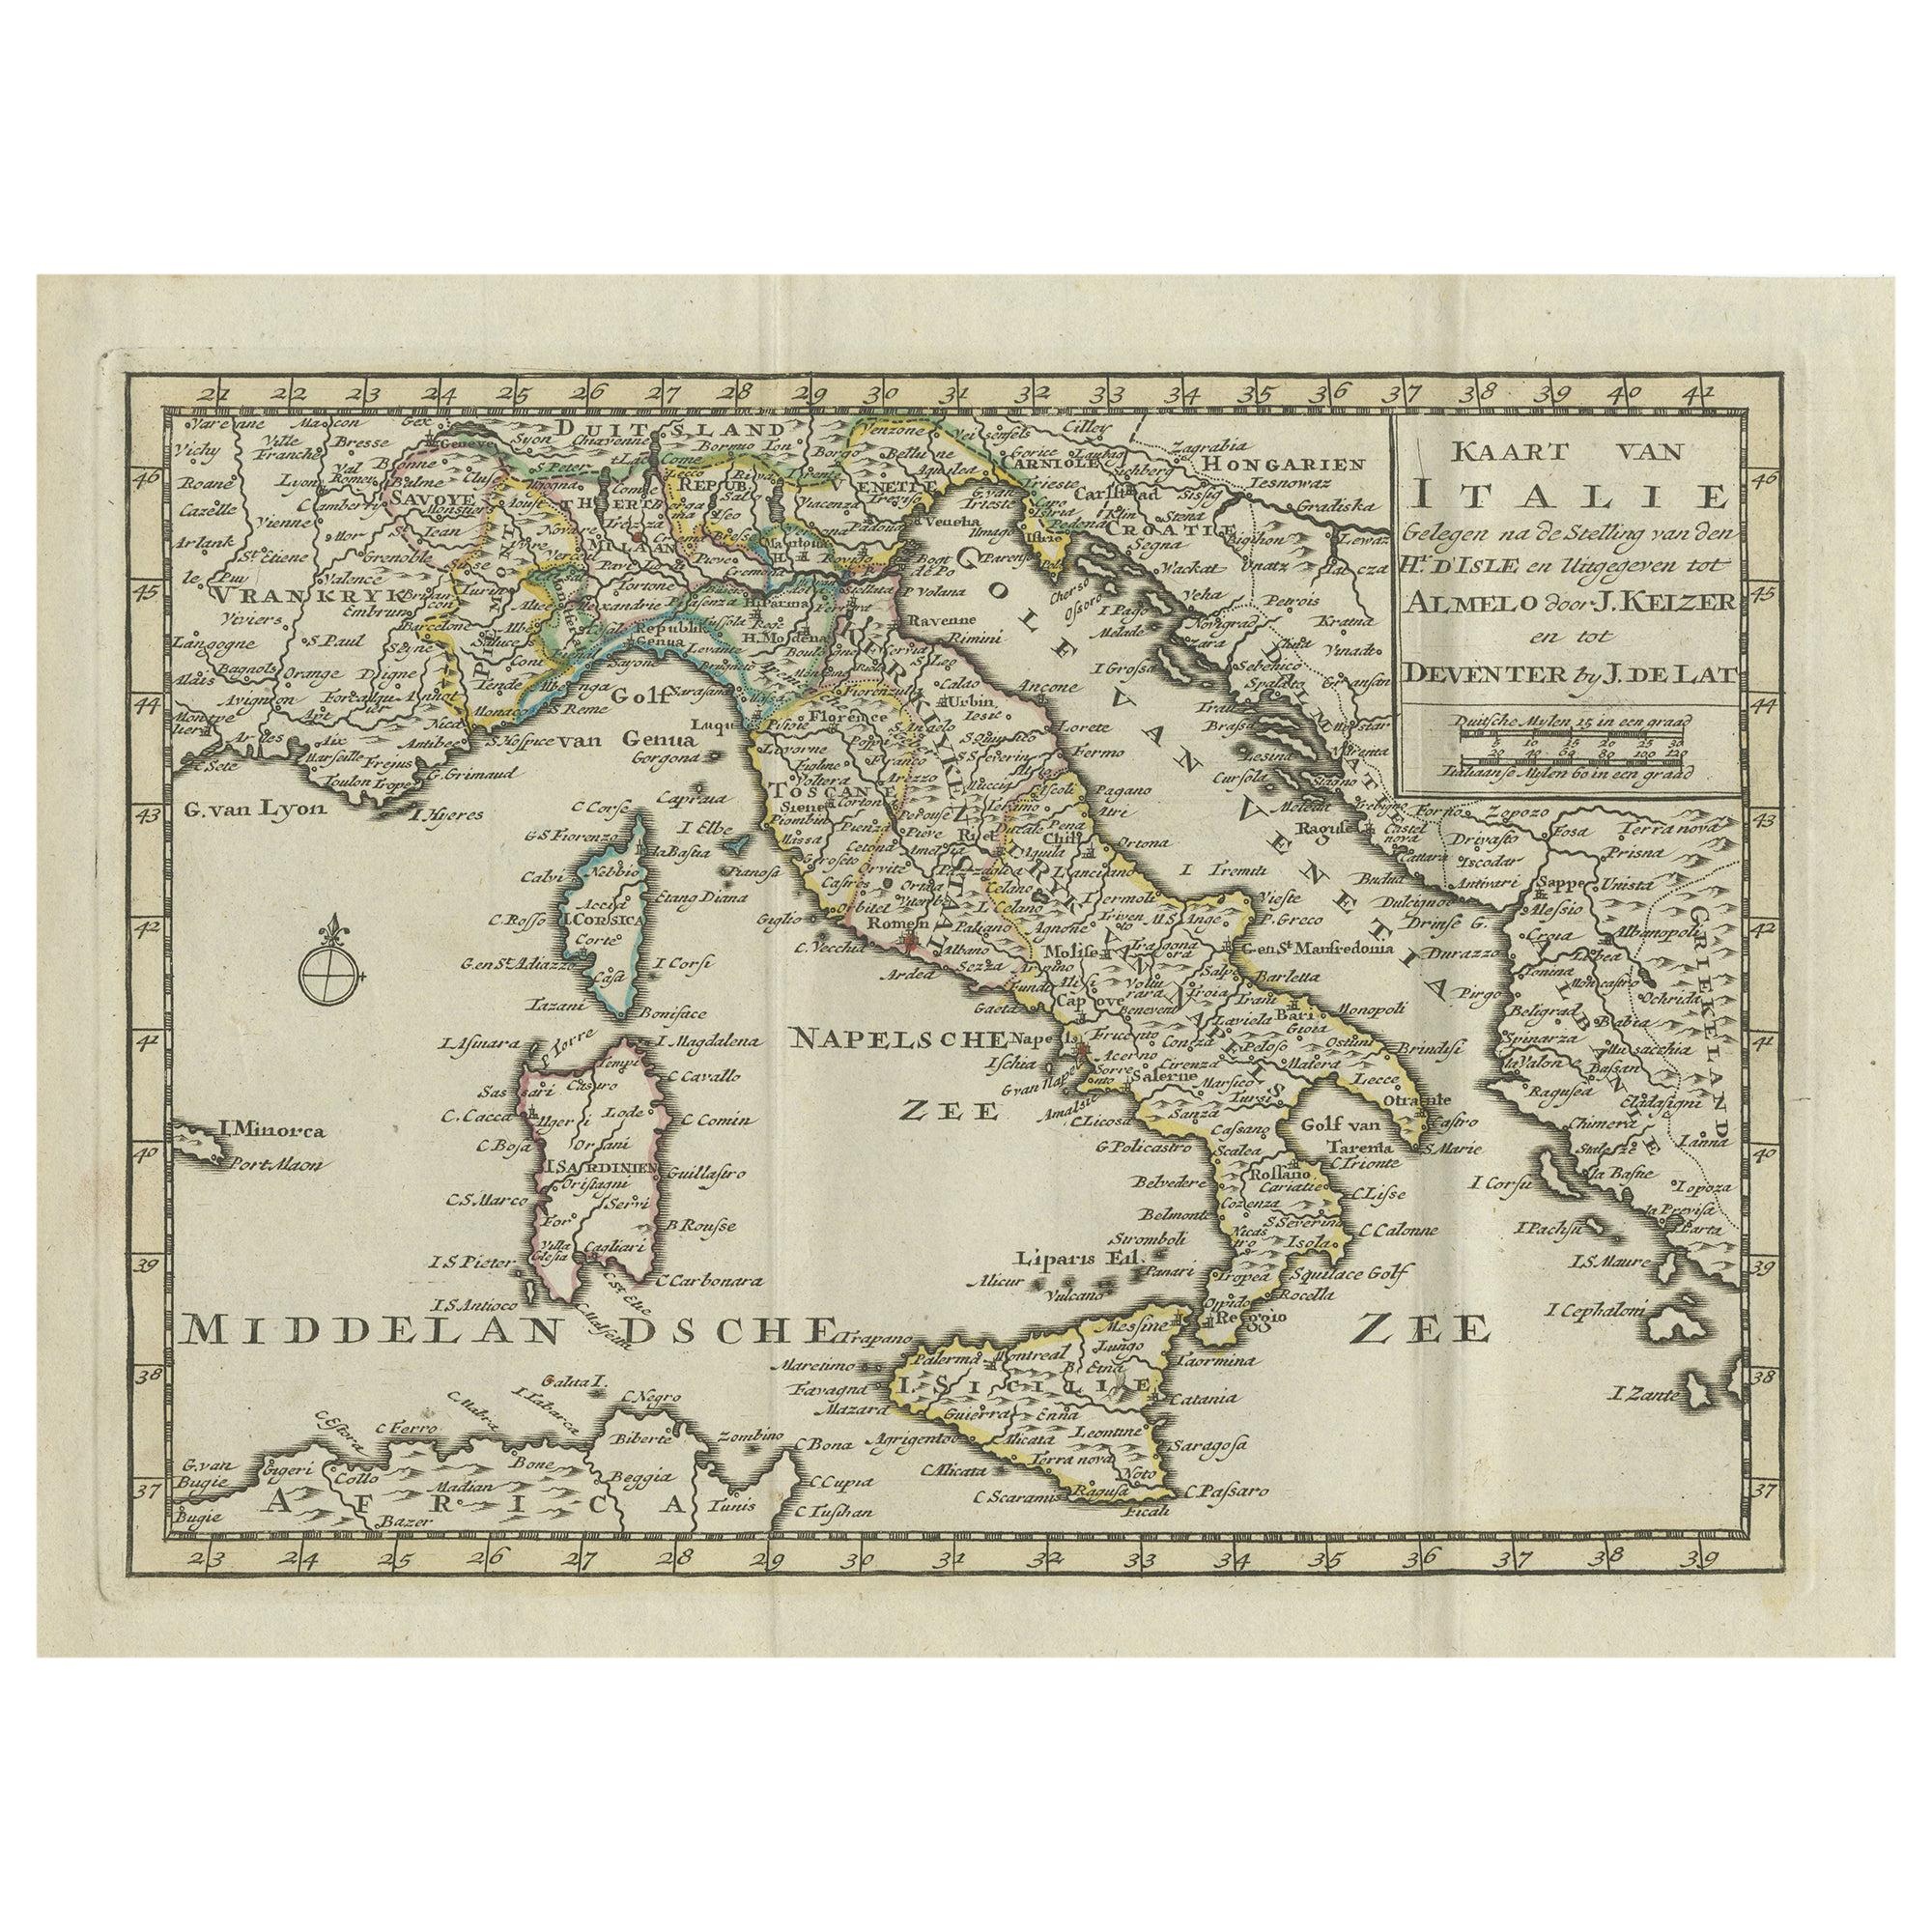 Antique Map of Italy by Keizer & de Lat, 1788